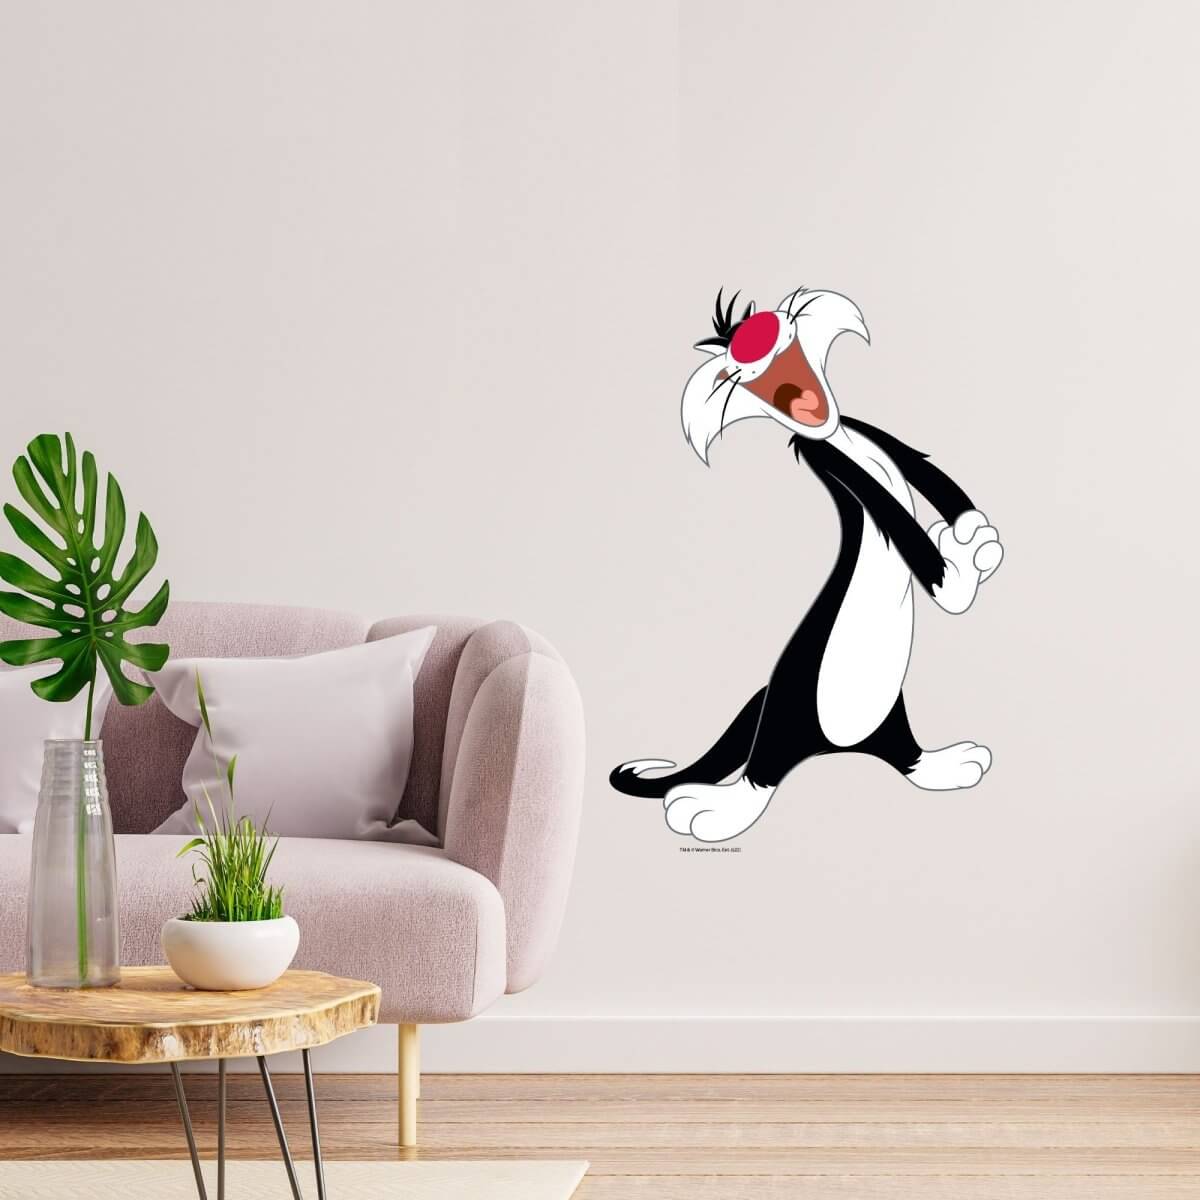 Kismet Decals Looney Tunes Sylvester Excited Licensed Wall Sticker - Easy DIY Home & Kids Room Decor Wall Decal Art - Kismet Decals